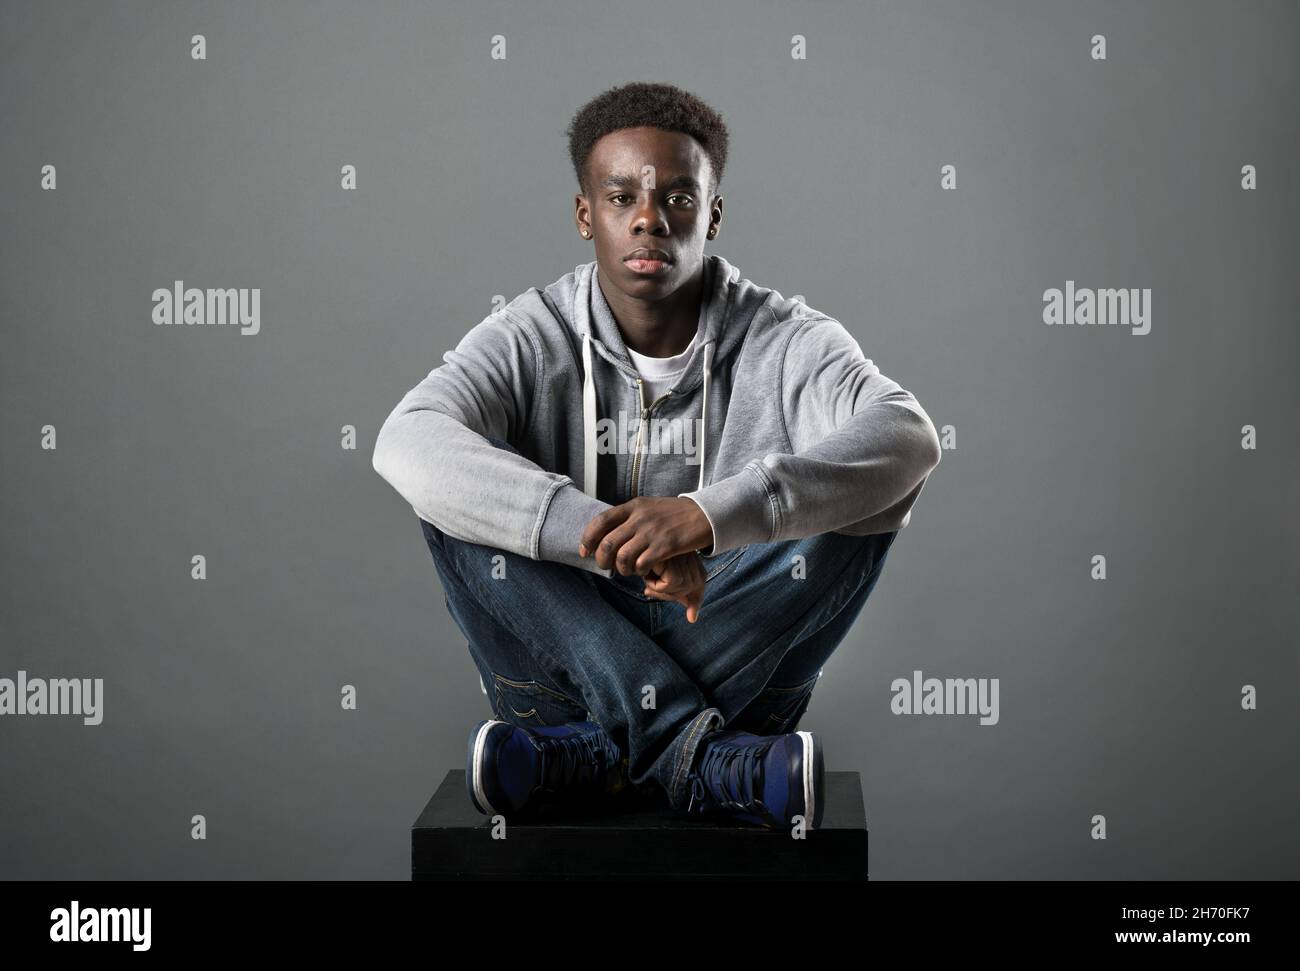 Young Black man in grey hoodie and jeans posing cross-legged in a studio looking at the camera with a serious deadpan expression Stock Photo